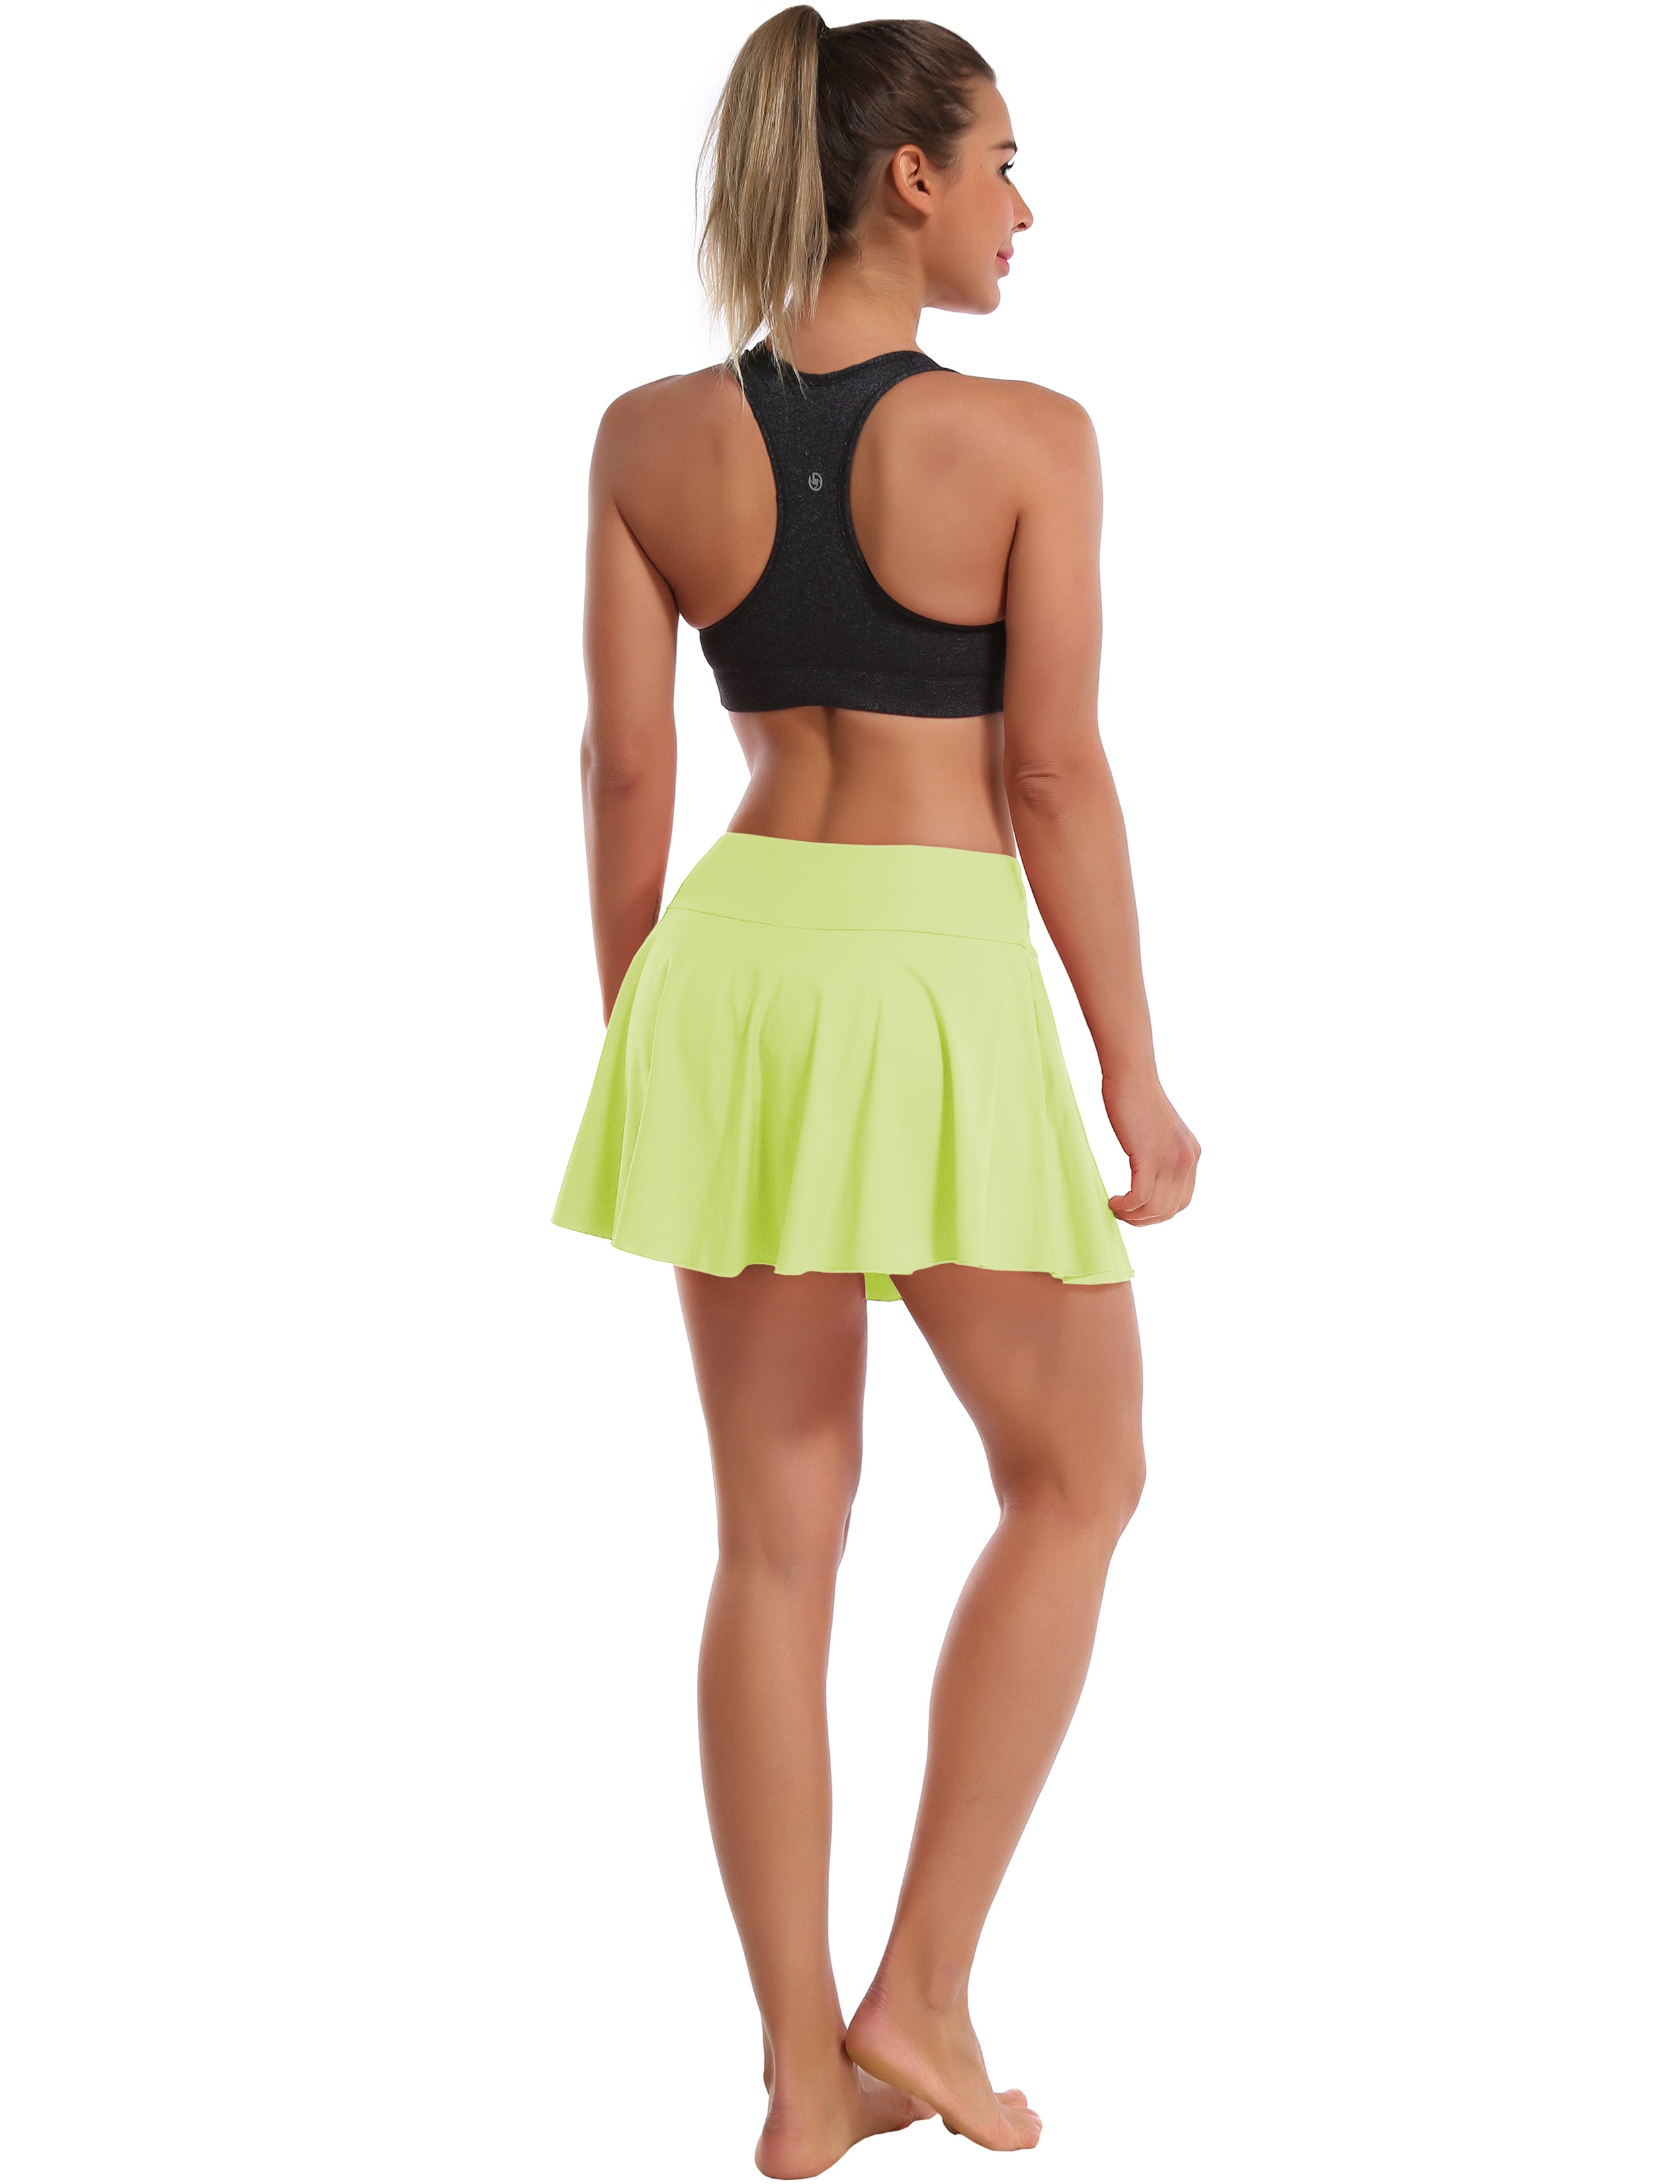 Athletic Tennis Golf Pleated Skort Awith Pocket Shorts noenyellow 80%Nylon/20%Spandex UPF 50+ sun protection Elastic closure Lightweight, Wrinkle Moisture wicking Quick drying Secure & comfortable two layer Hidden pocket